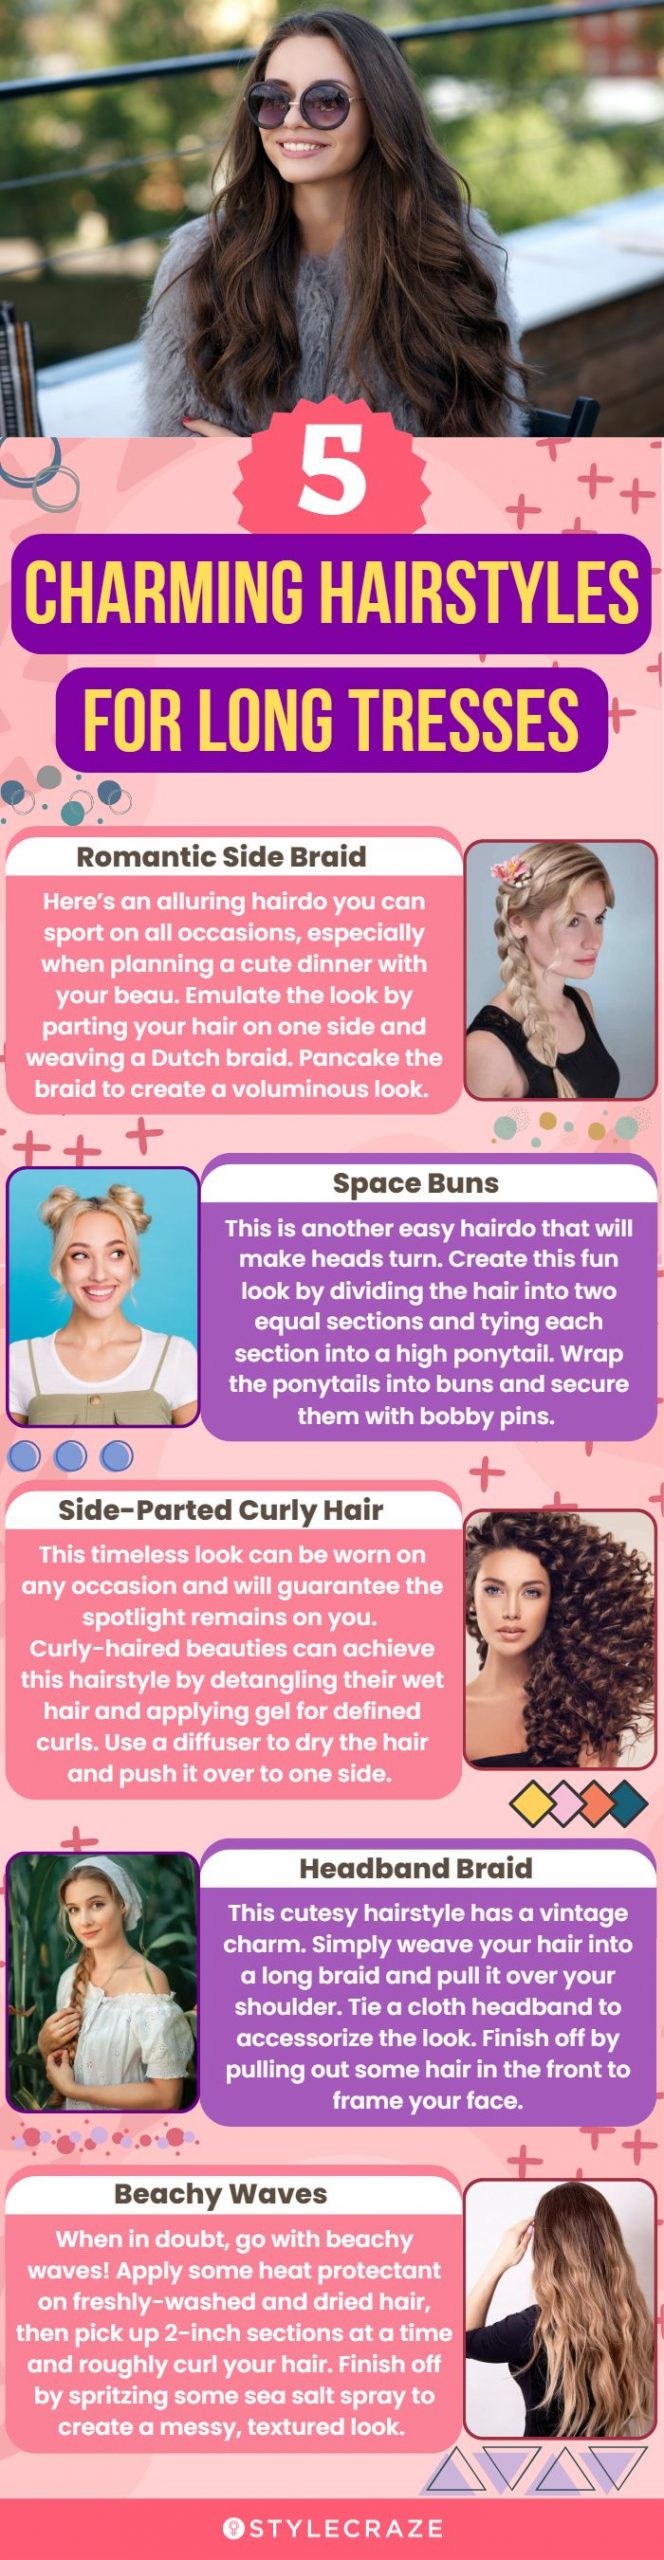 5 charming hairstyles for long tresses (infographic)